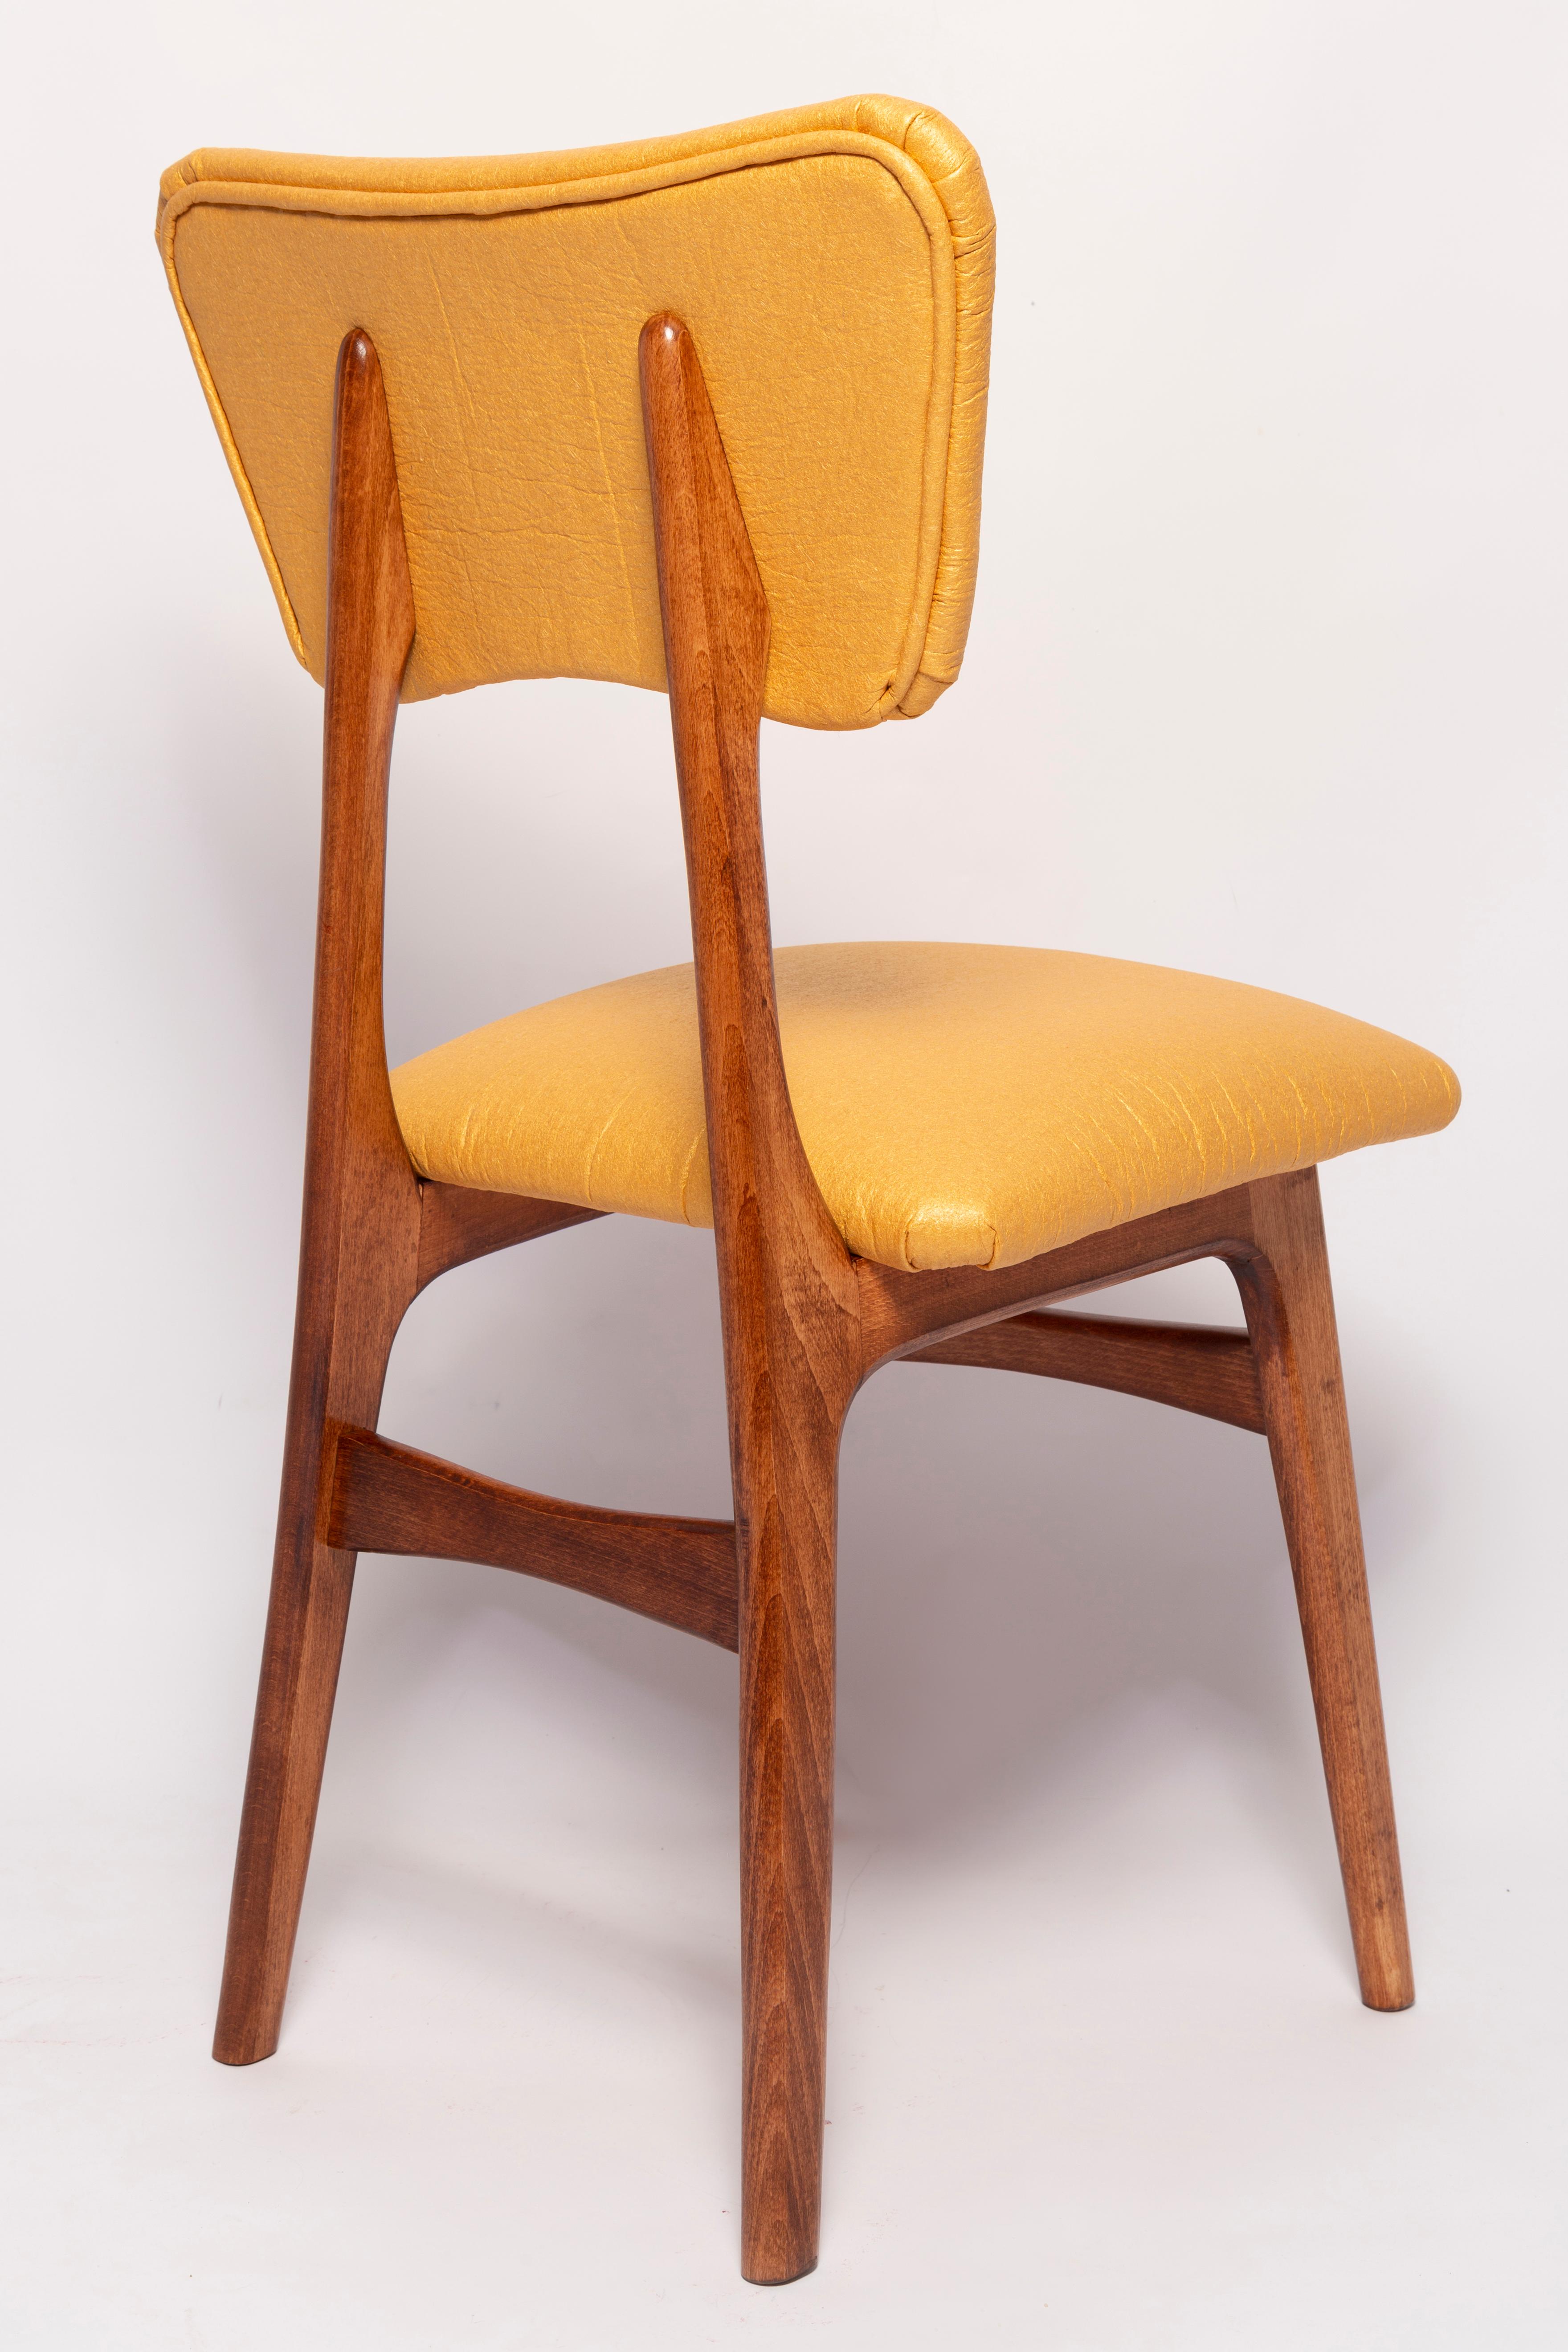 Mid Century Butterfly Dining Chair, Pineapple Vegan Leather, Europe, 1960s For Sale 3